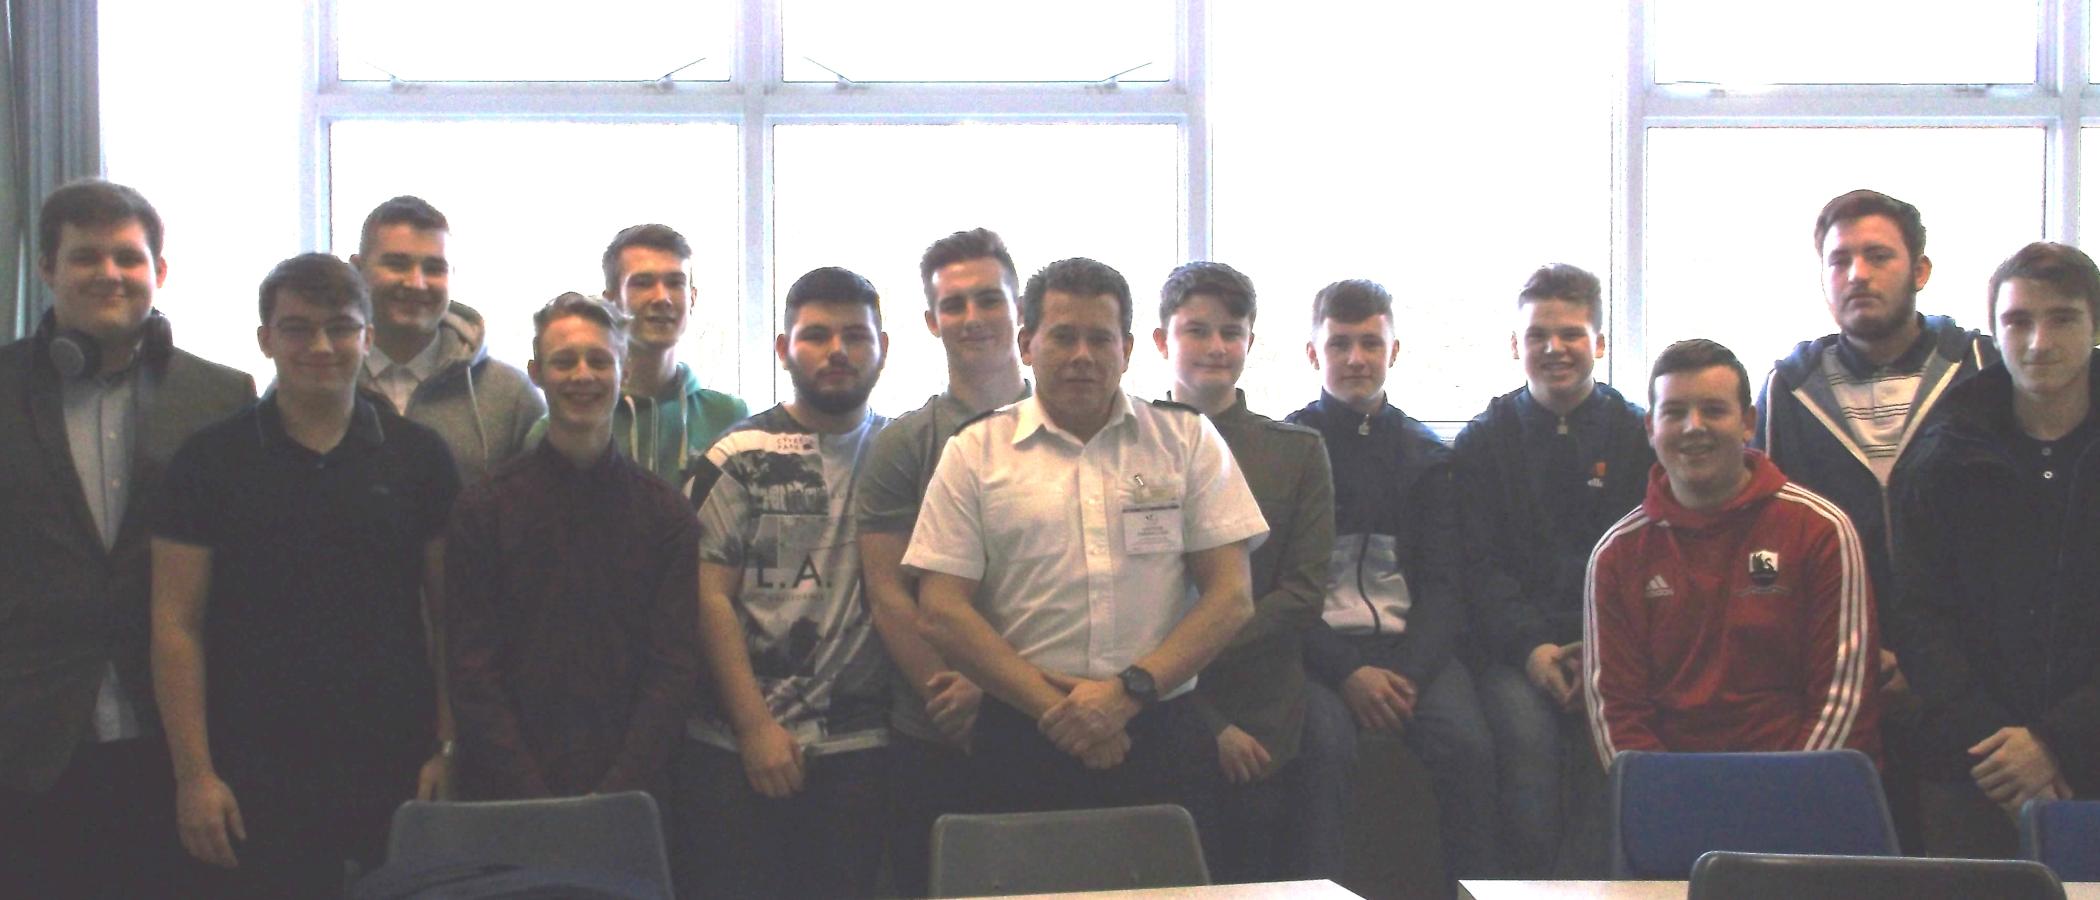 Royal Navy careers talk for Engineering Tech students